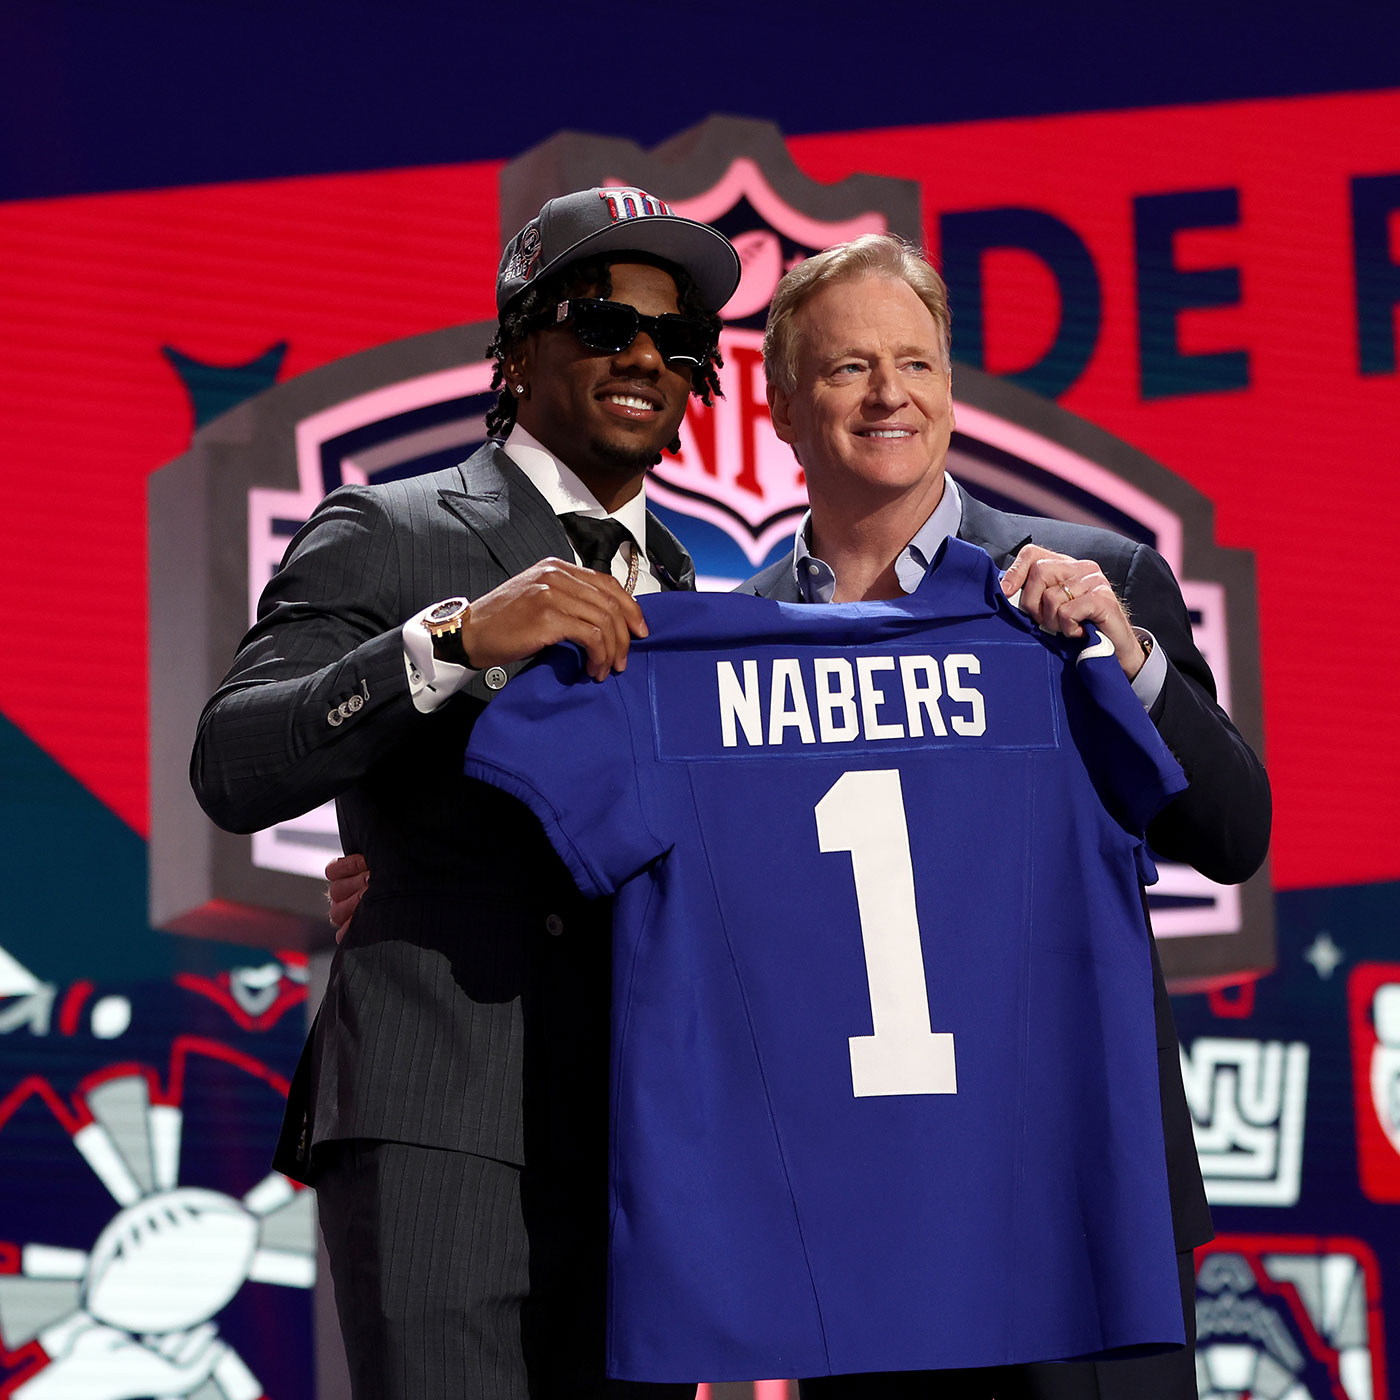 NFL Draft Interview: Malik Nabers (NY Giants; #6 overall)